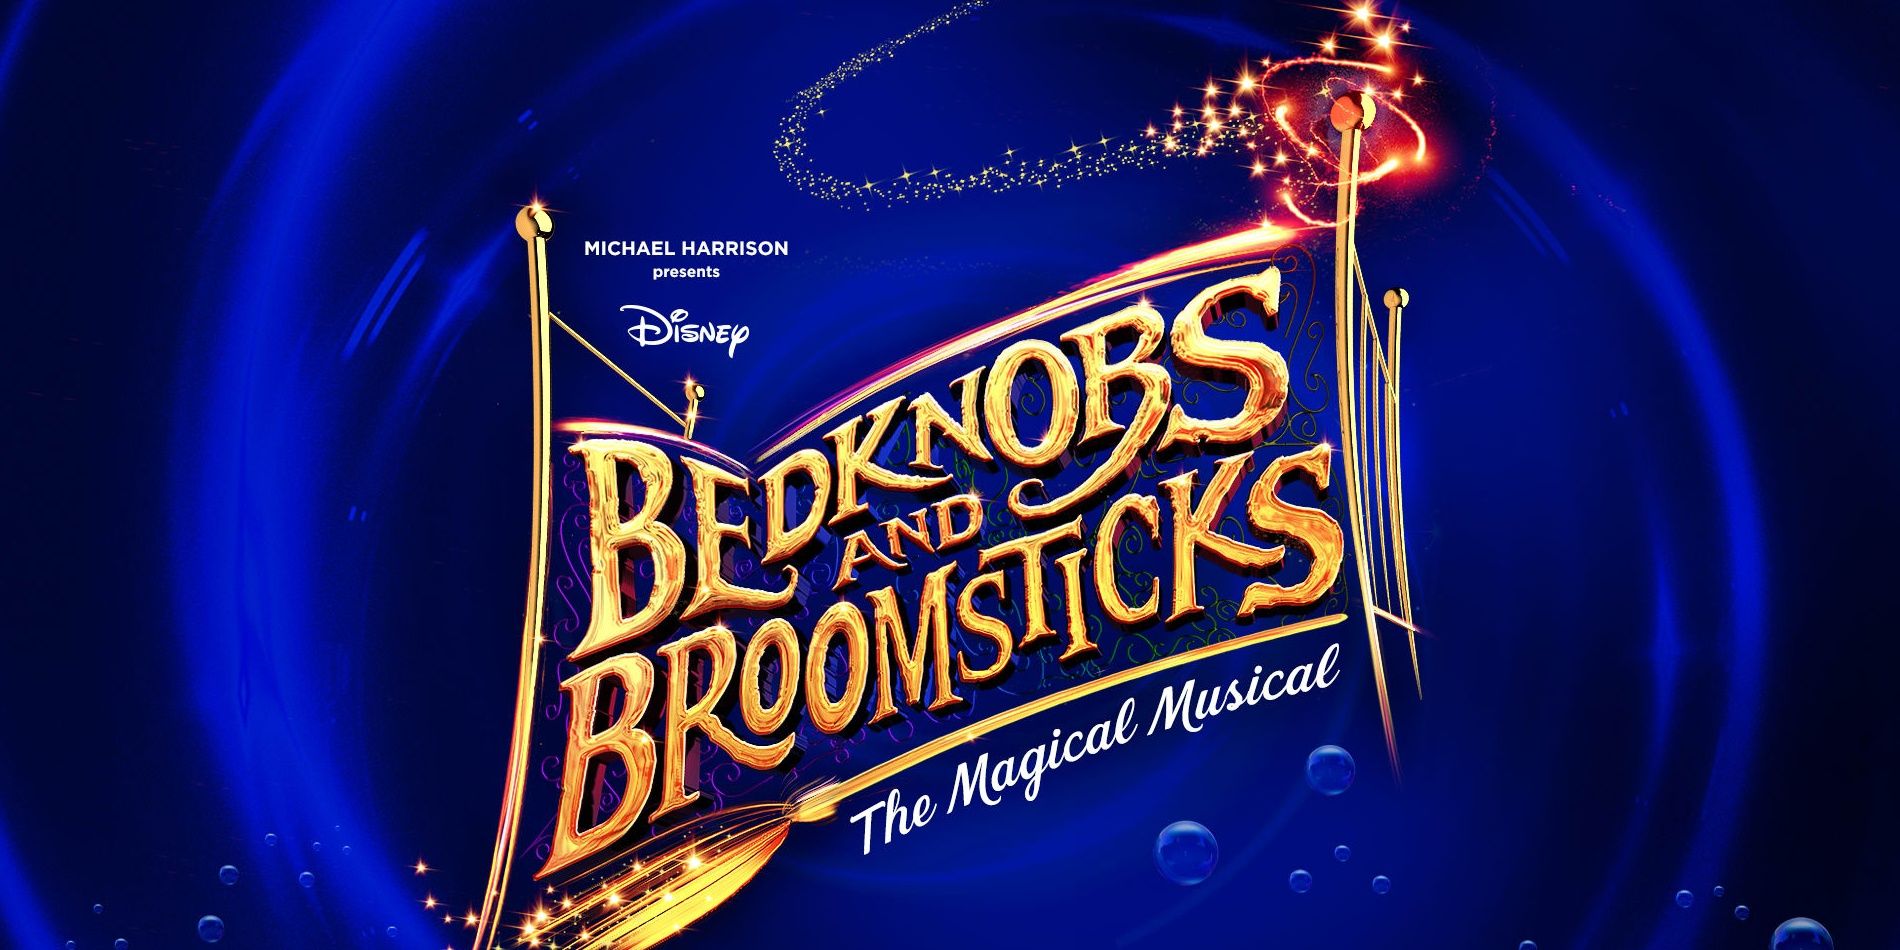 Bedknobs and Broomsticks musical image 